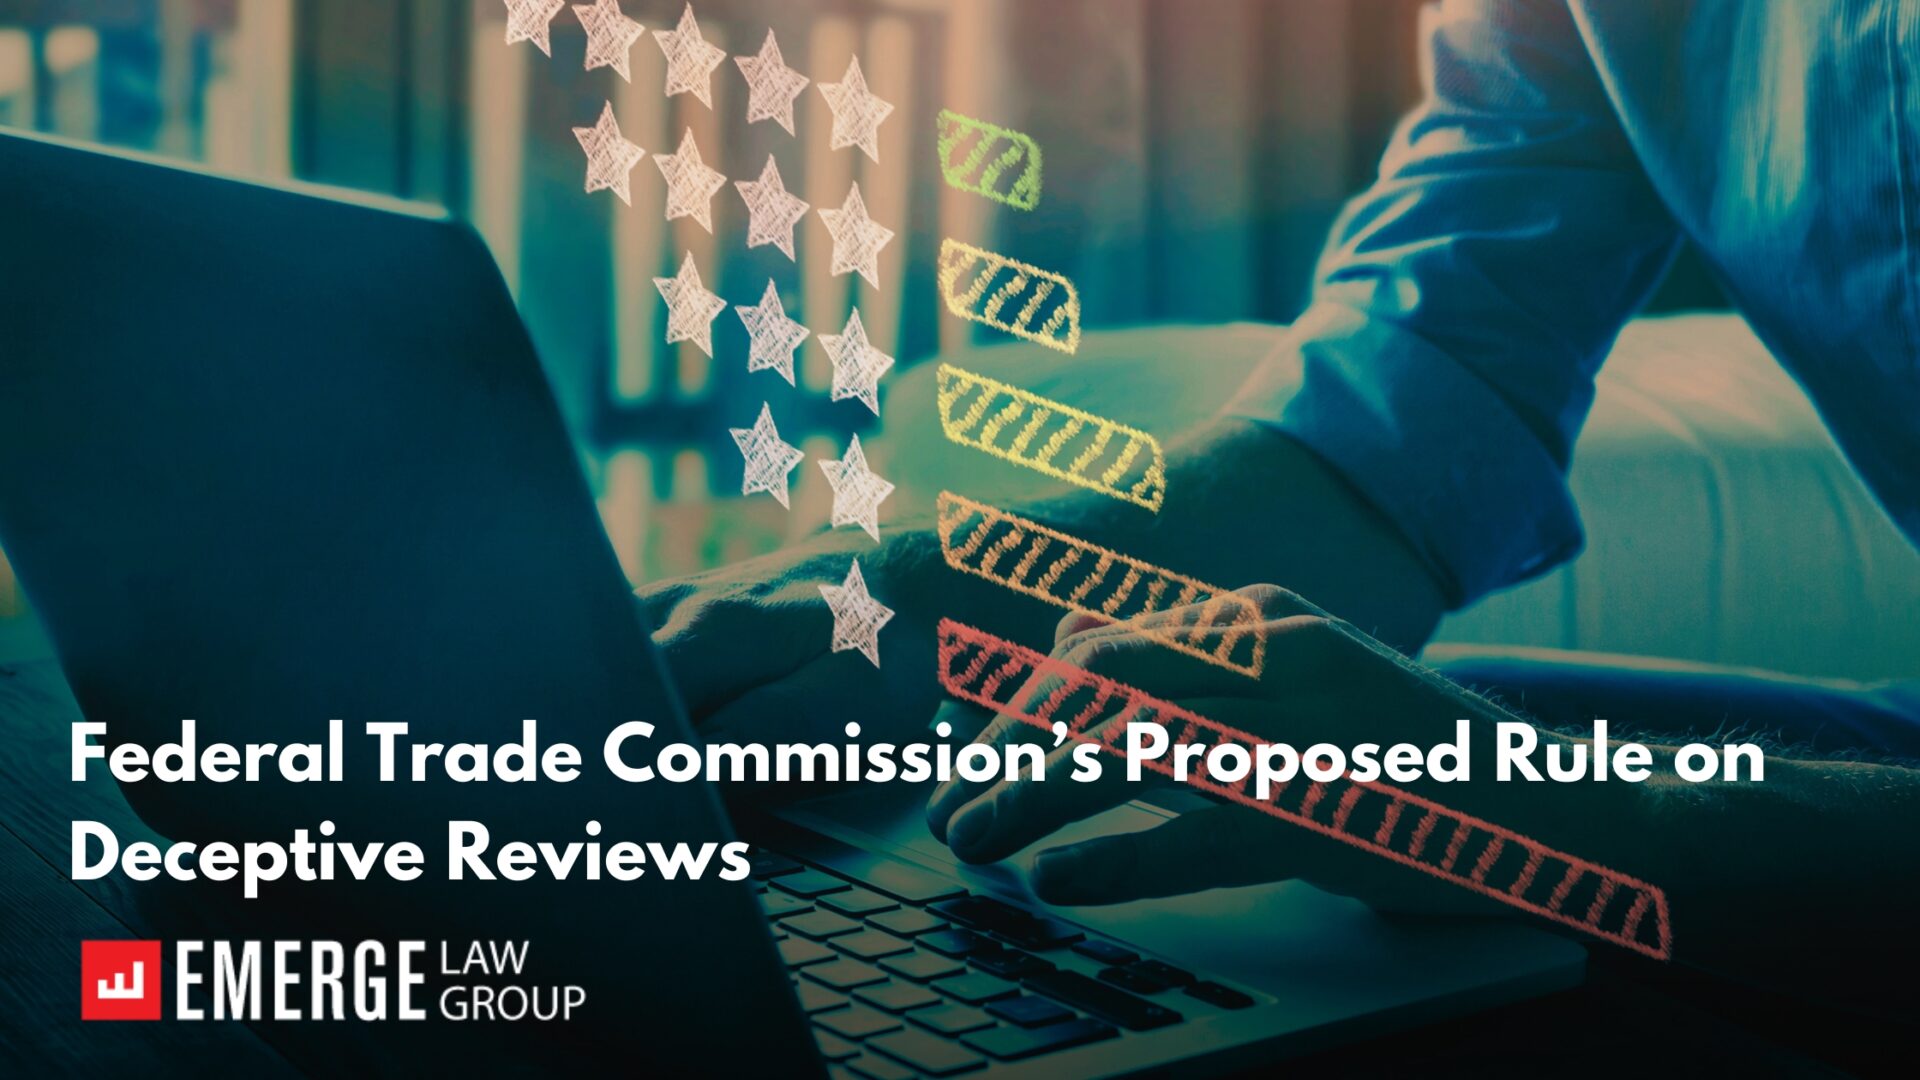 Federal Trade Commission’s Proposed Rule on Deceptive Reviews